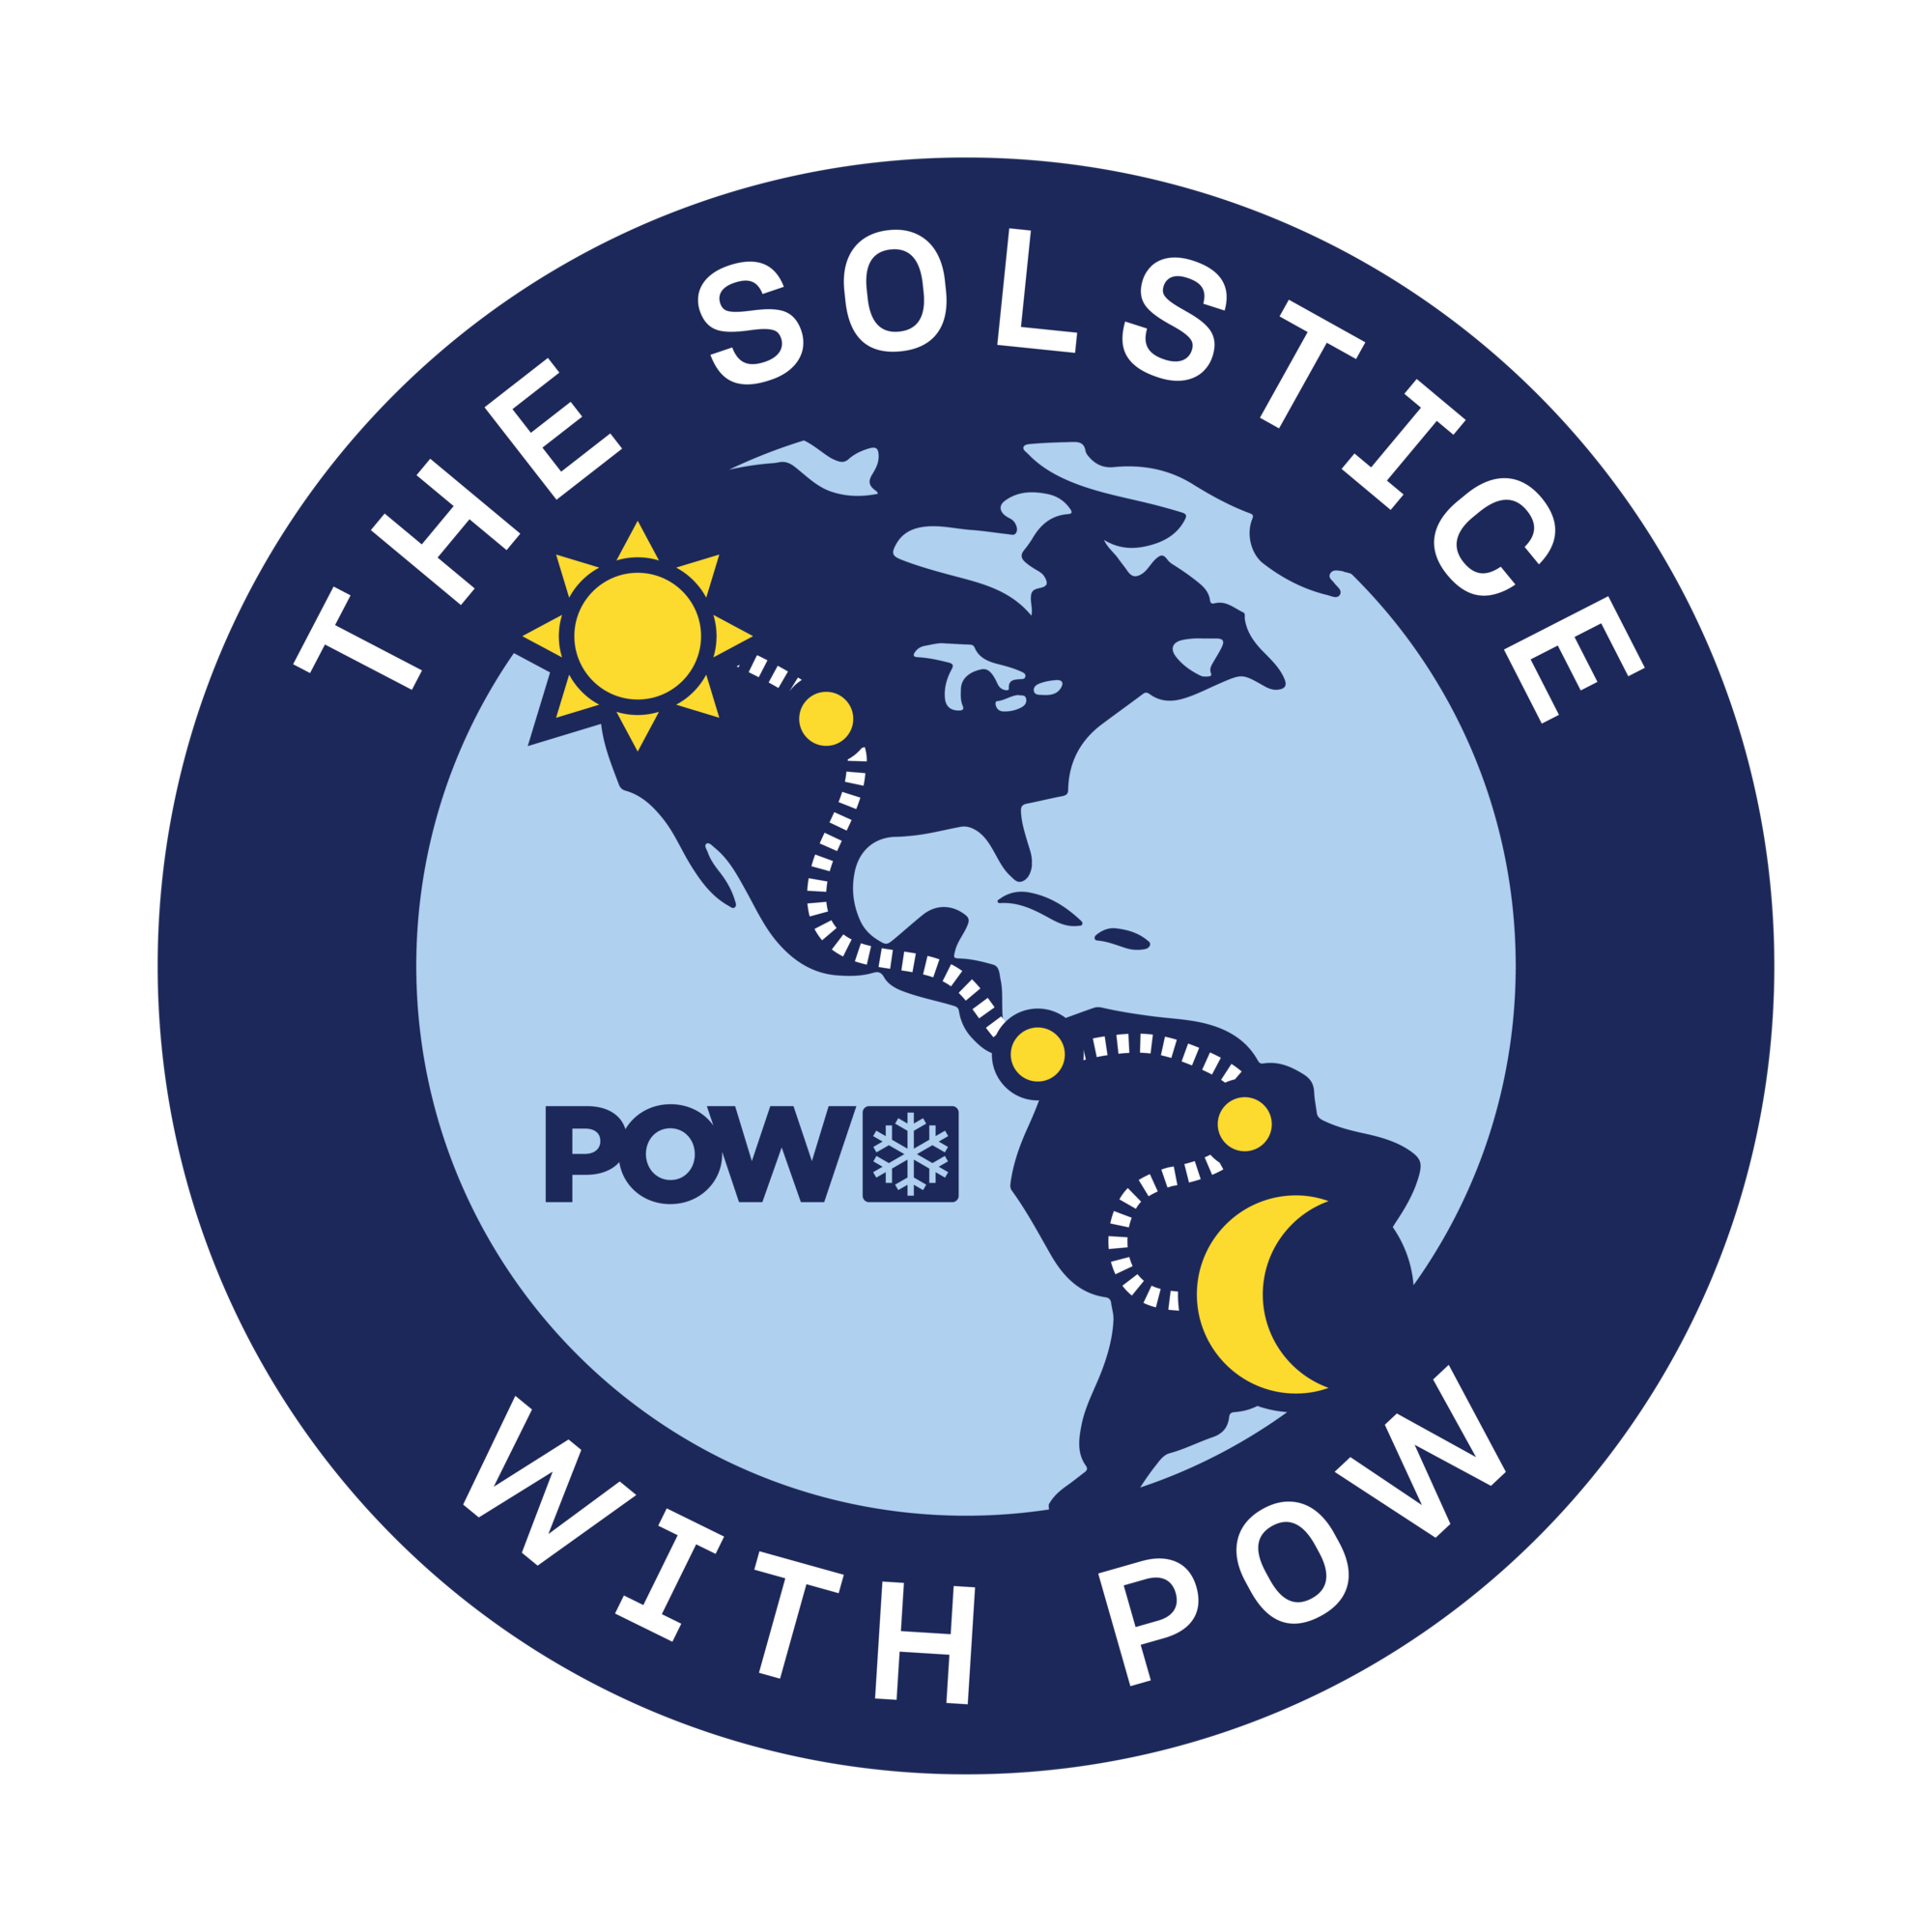 The Solstice with POW